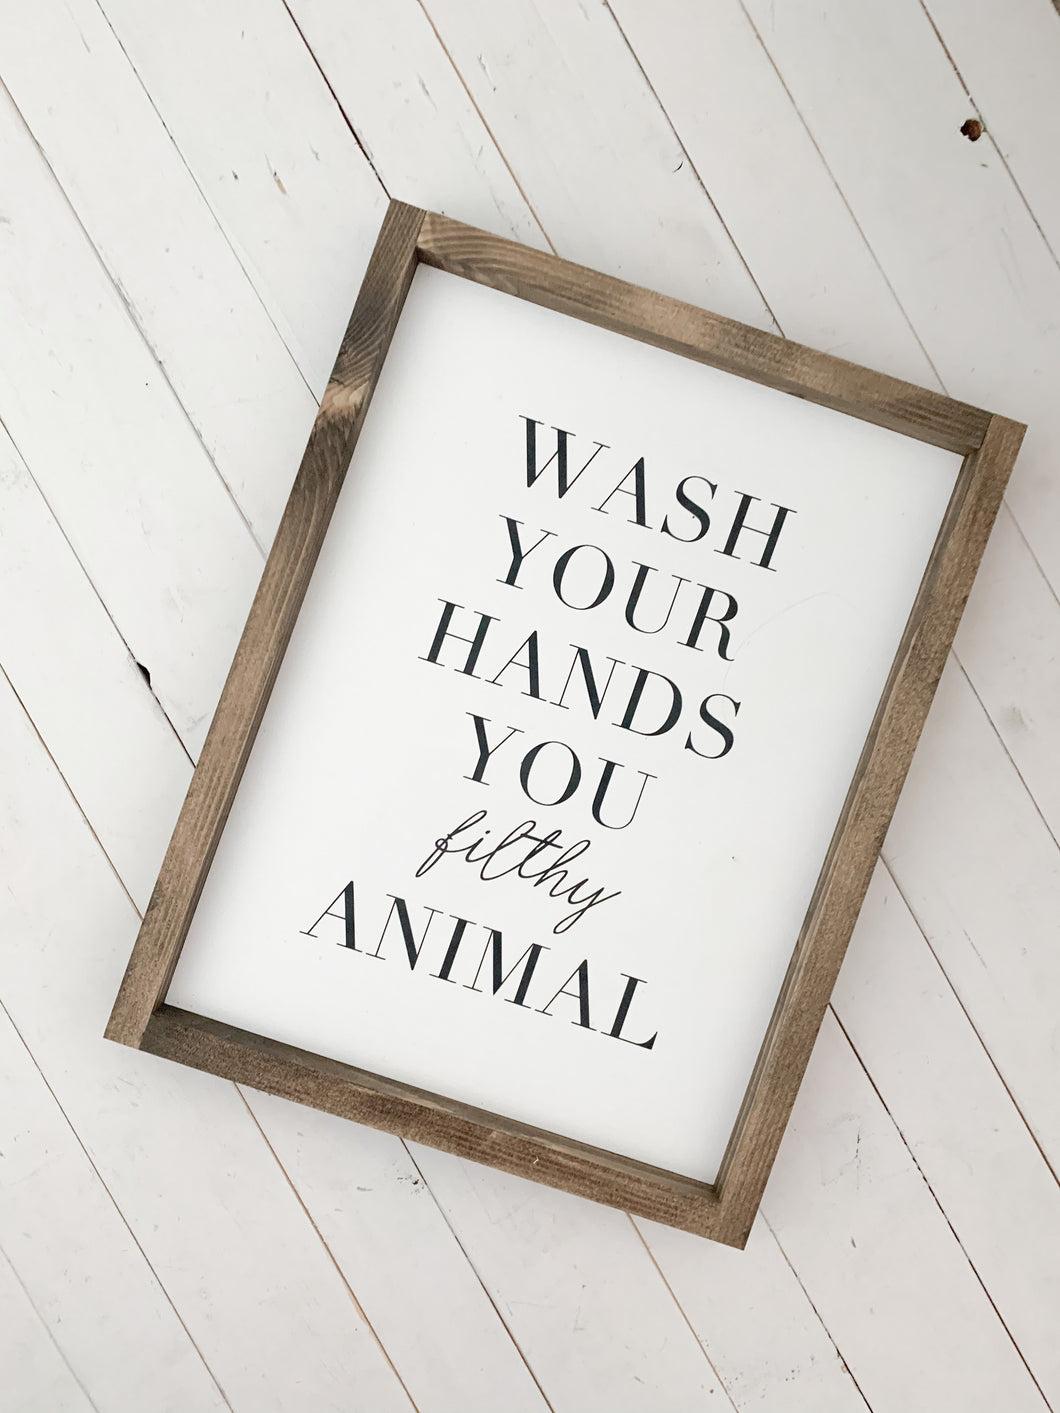 Wash your hands you flithy animal